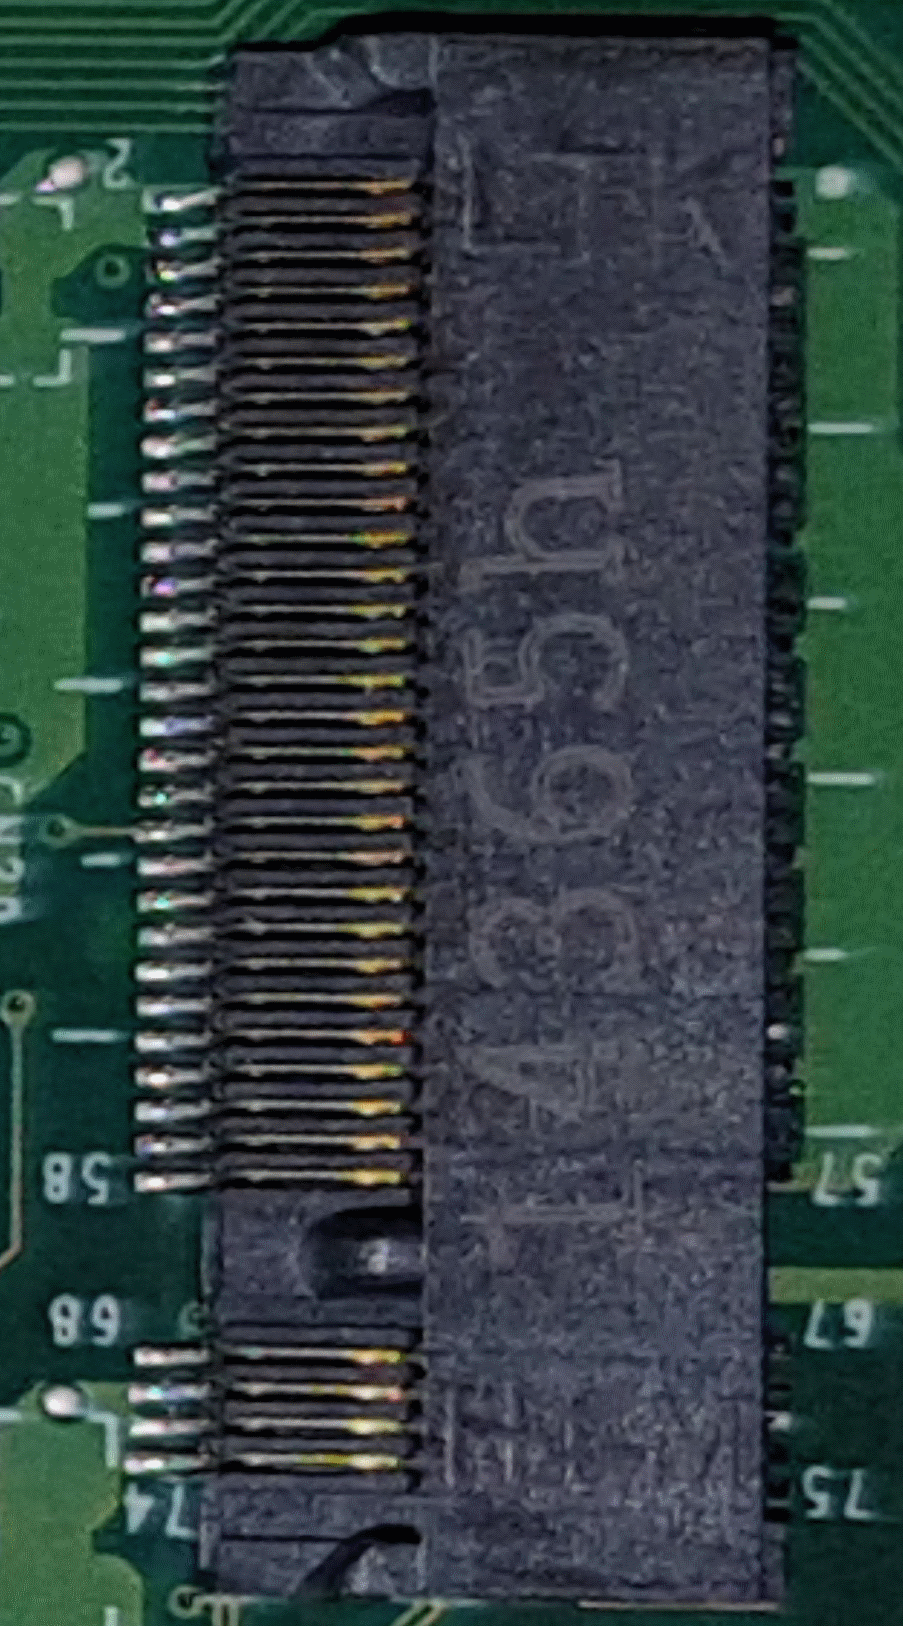 Connector on my motherboard